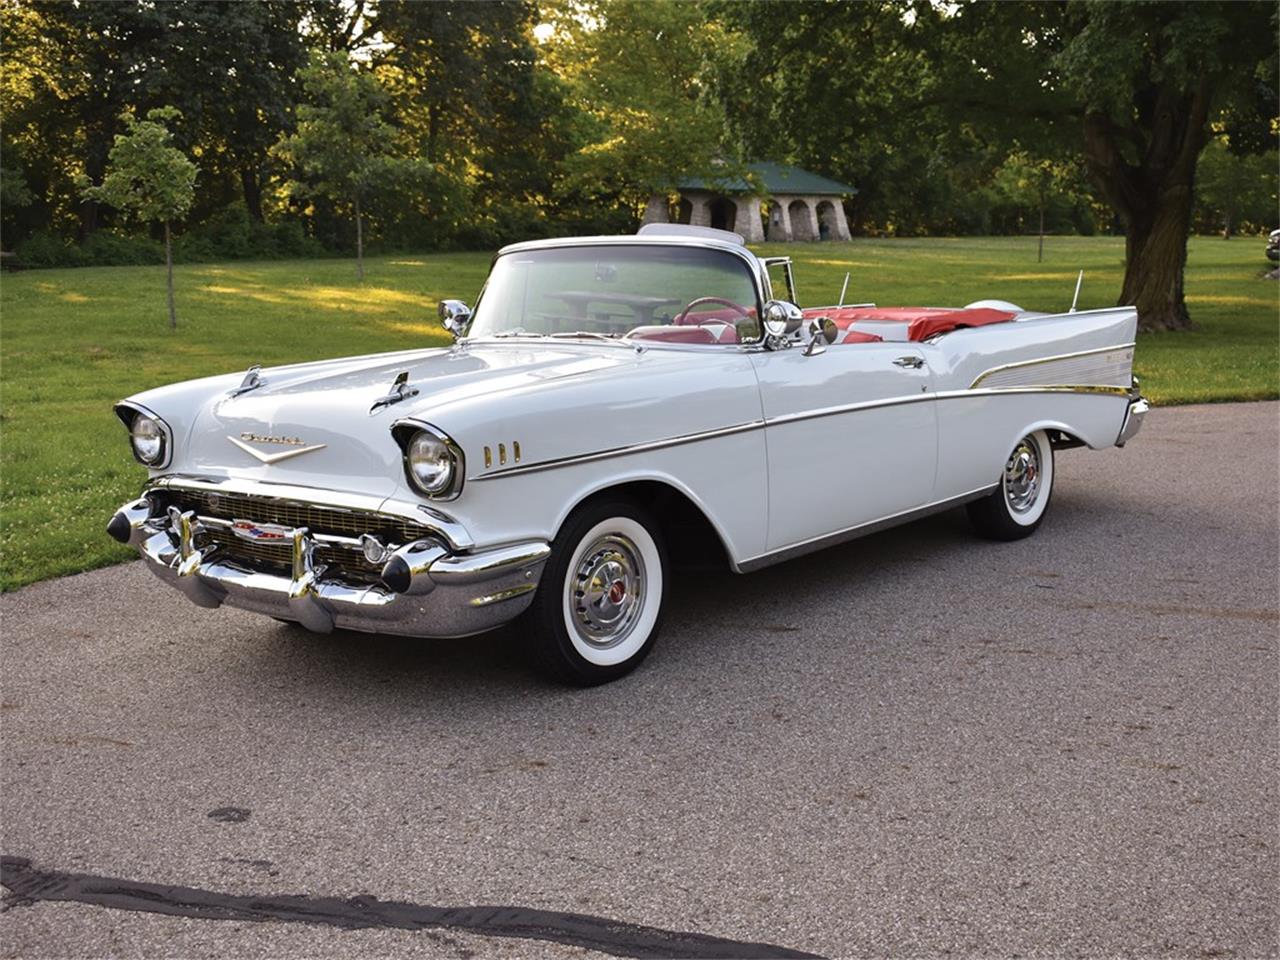 For Sale at Auction: 1957 Chevrolet Bel Air for sale in Auburn, IN